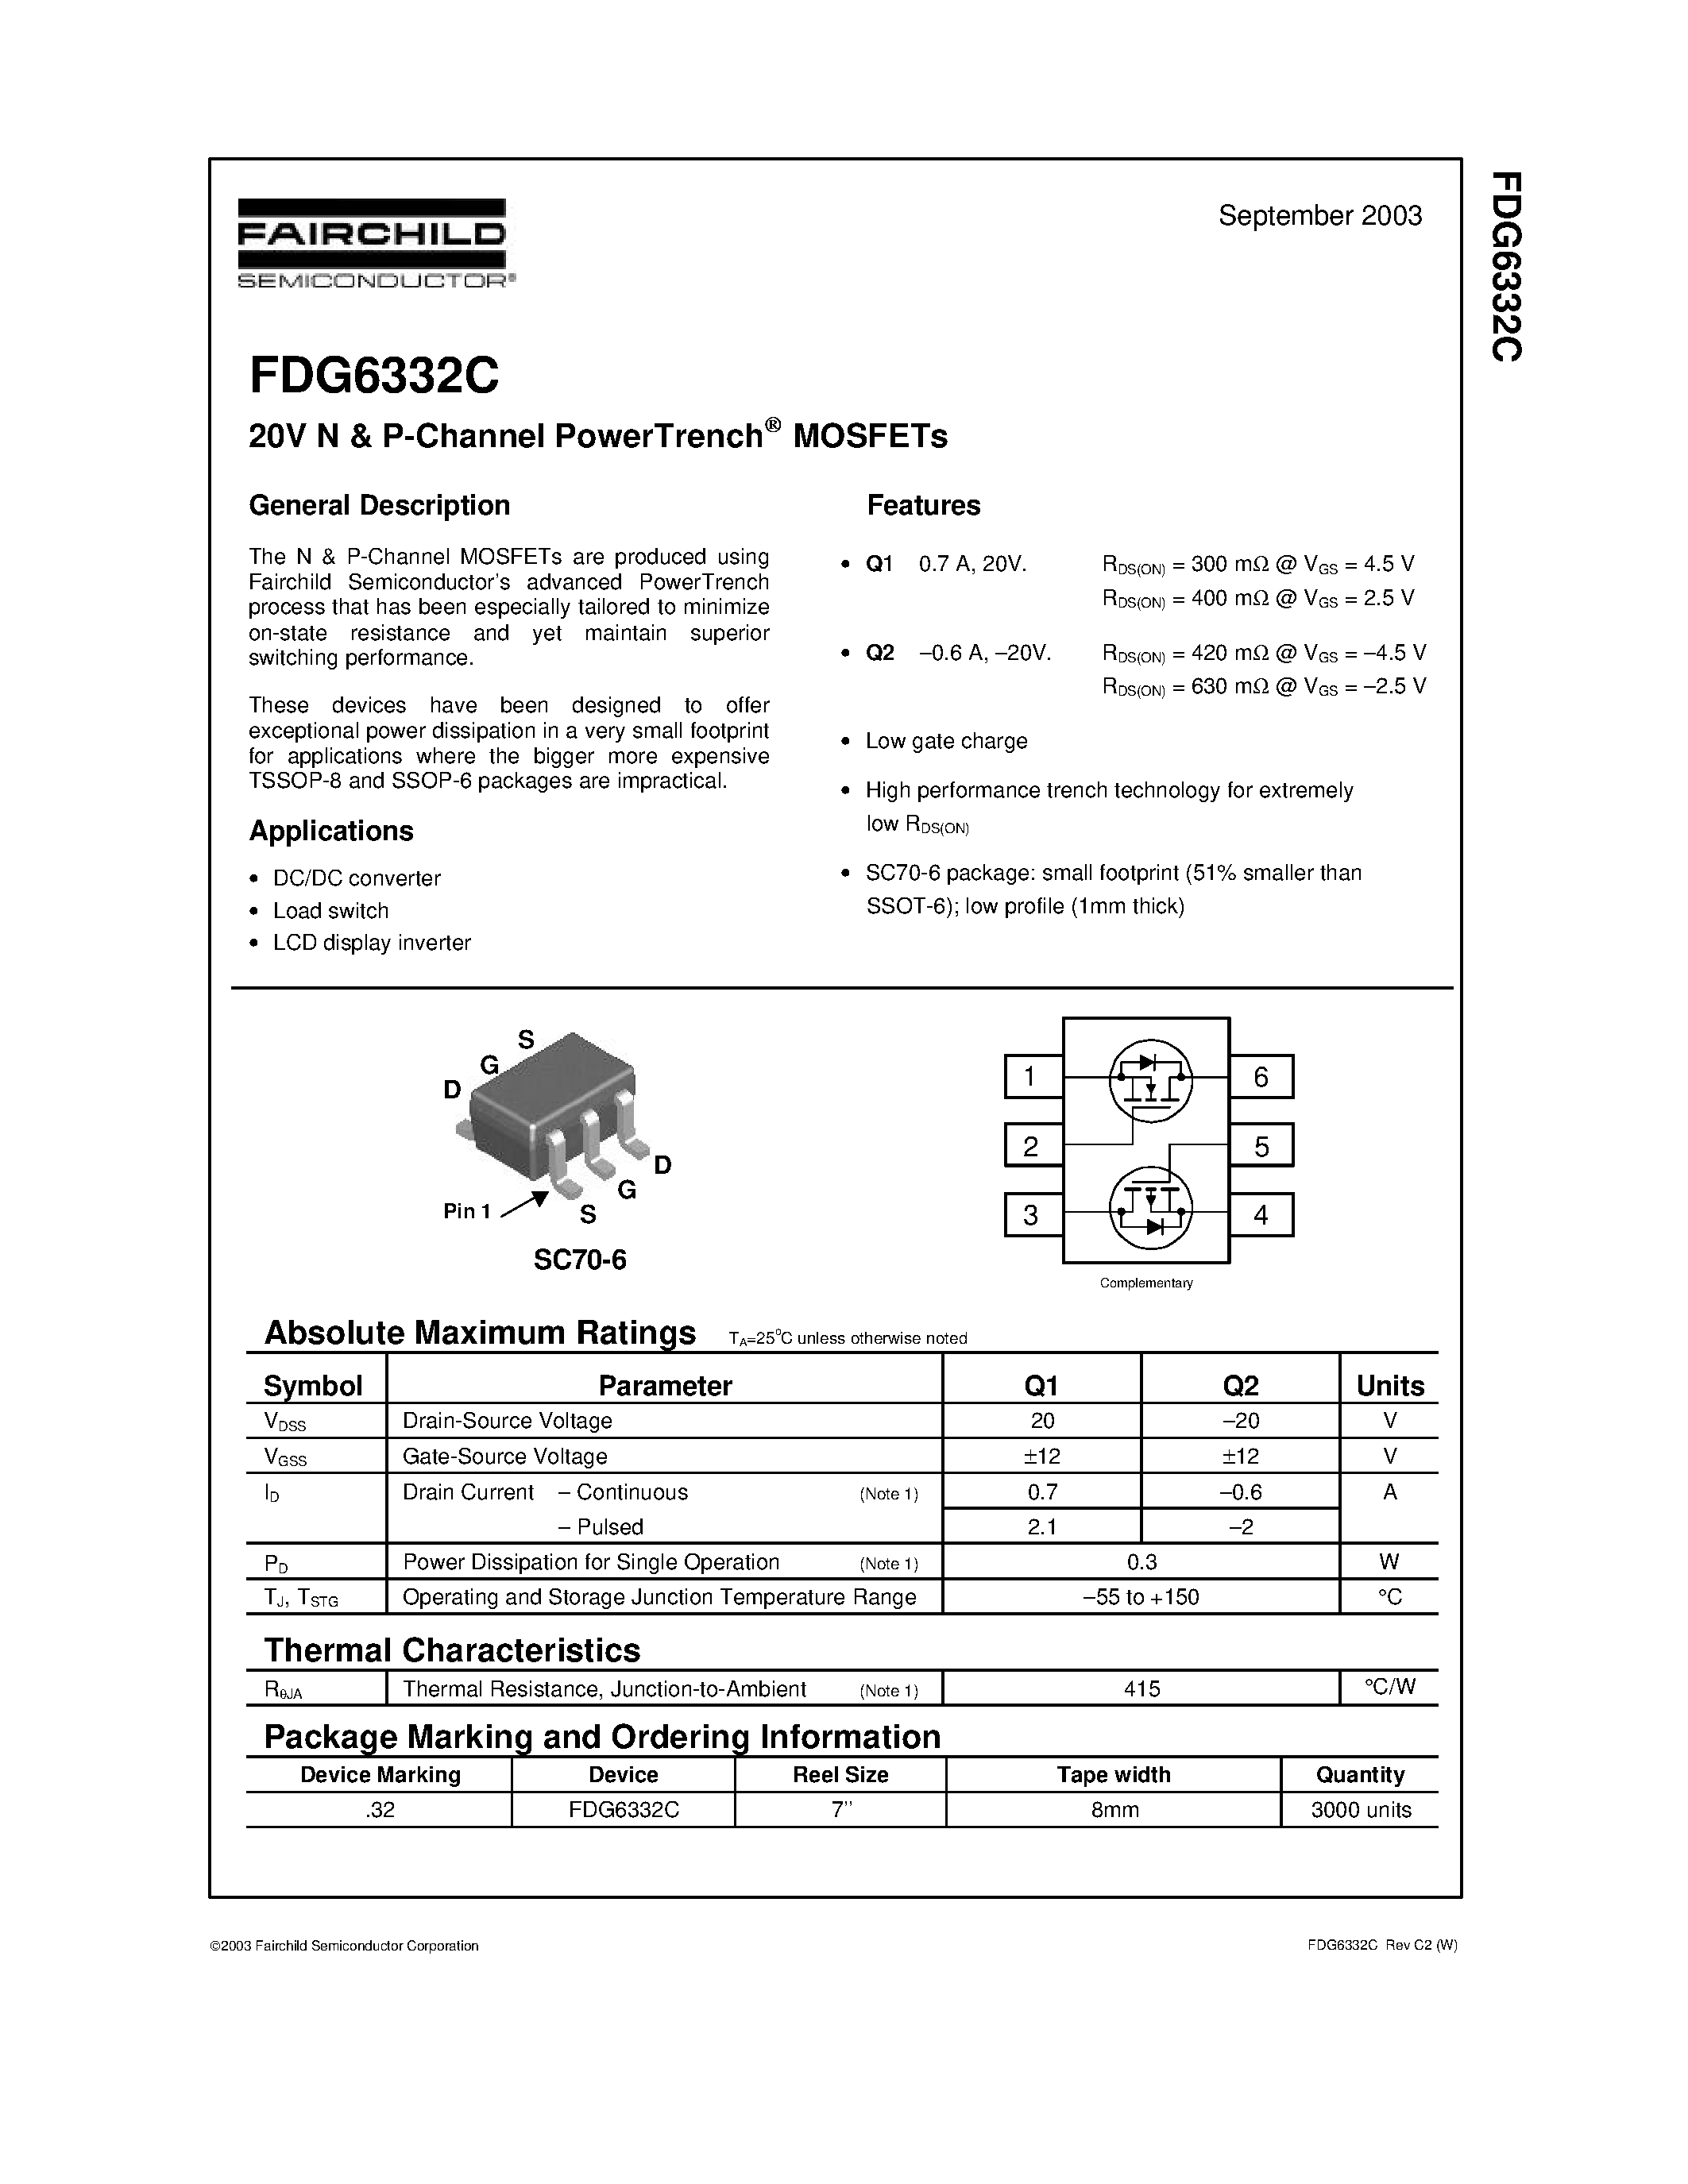 Datasheet FDG6332C - 20V N & P-Channel PowerTrench MOSFETs page 1